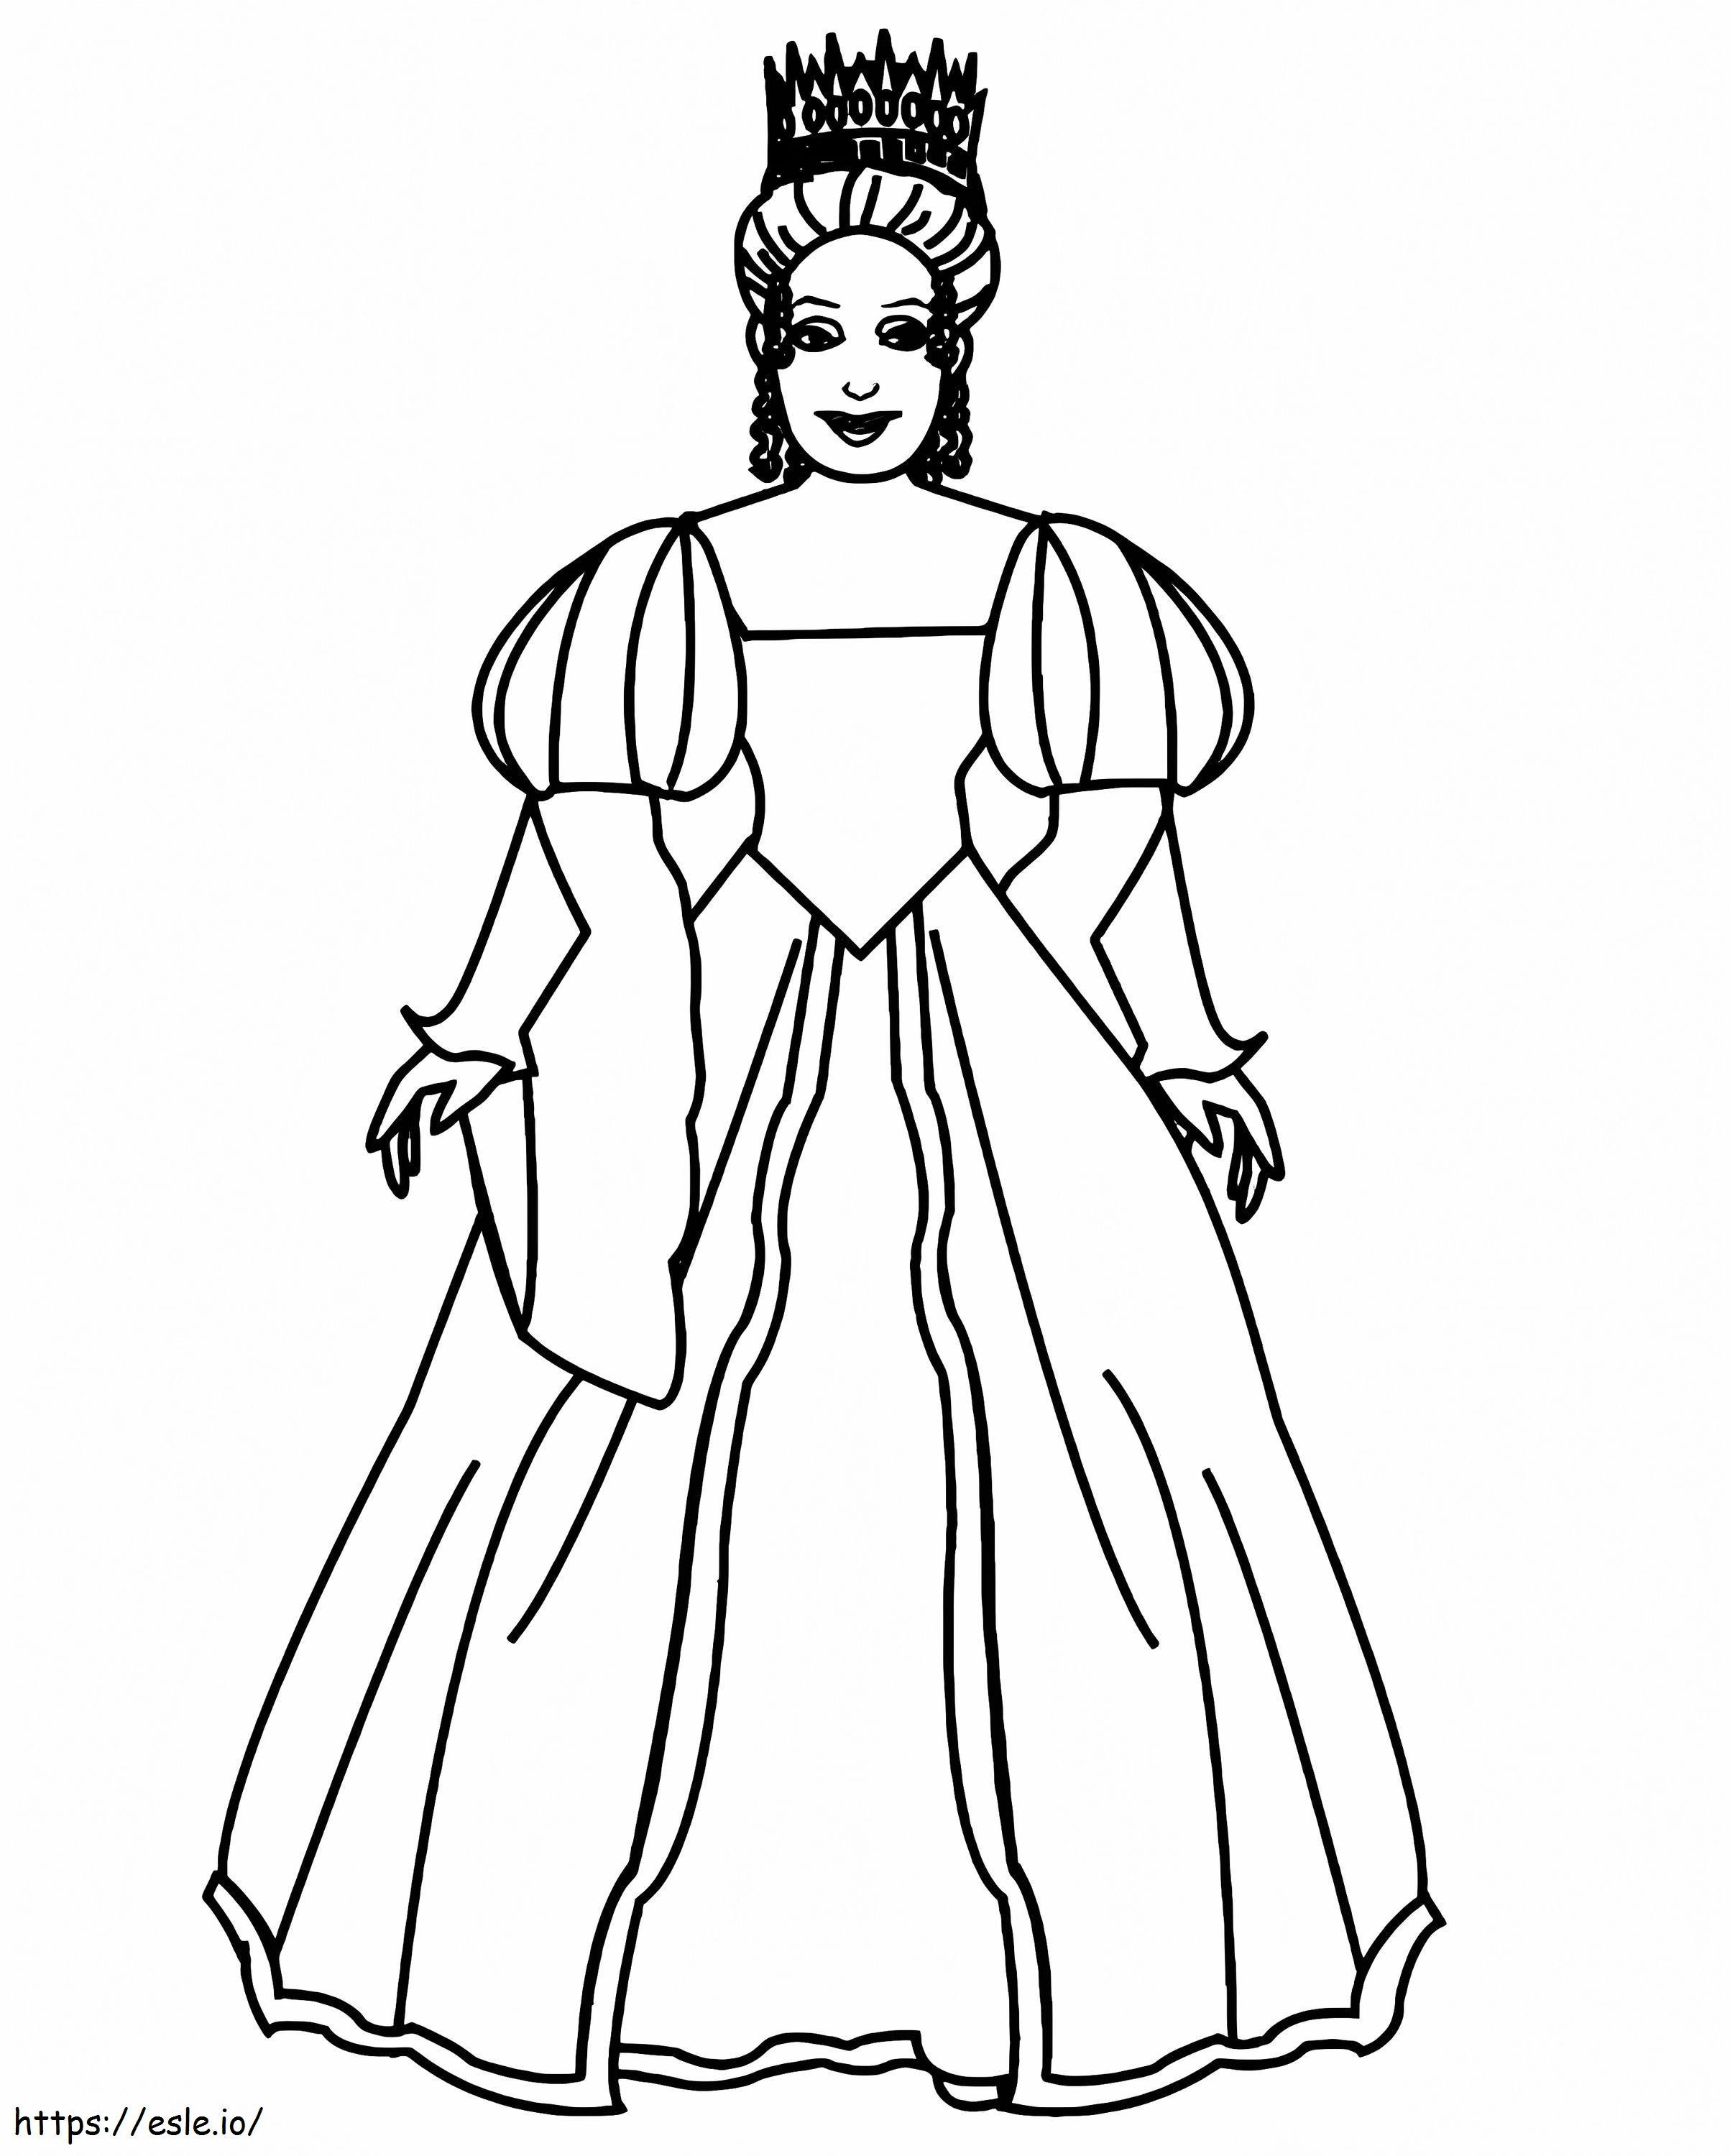 Wonderful Queen coloring page